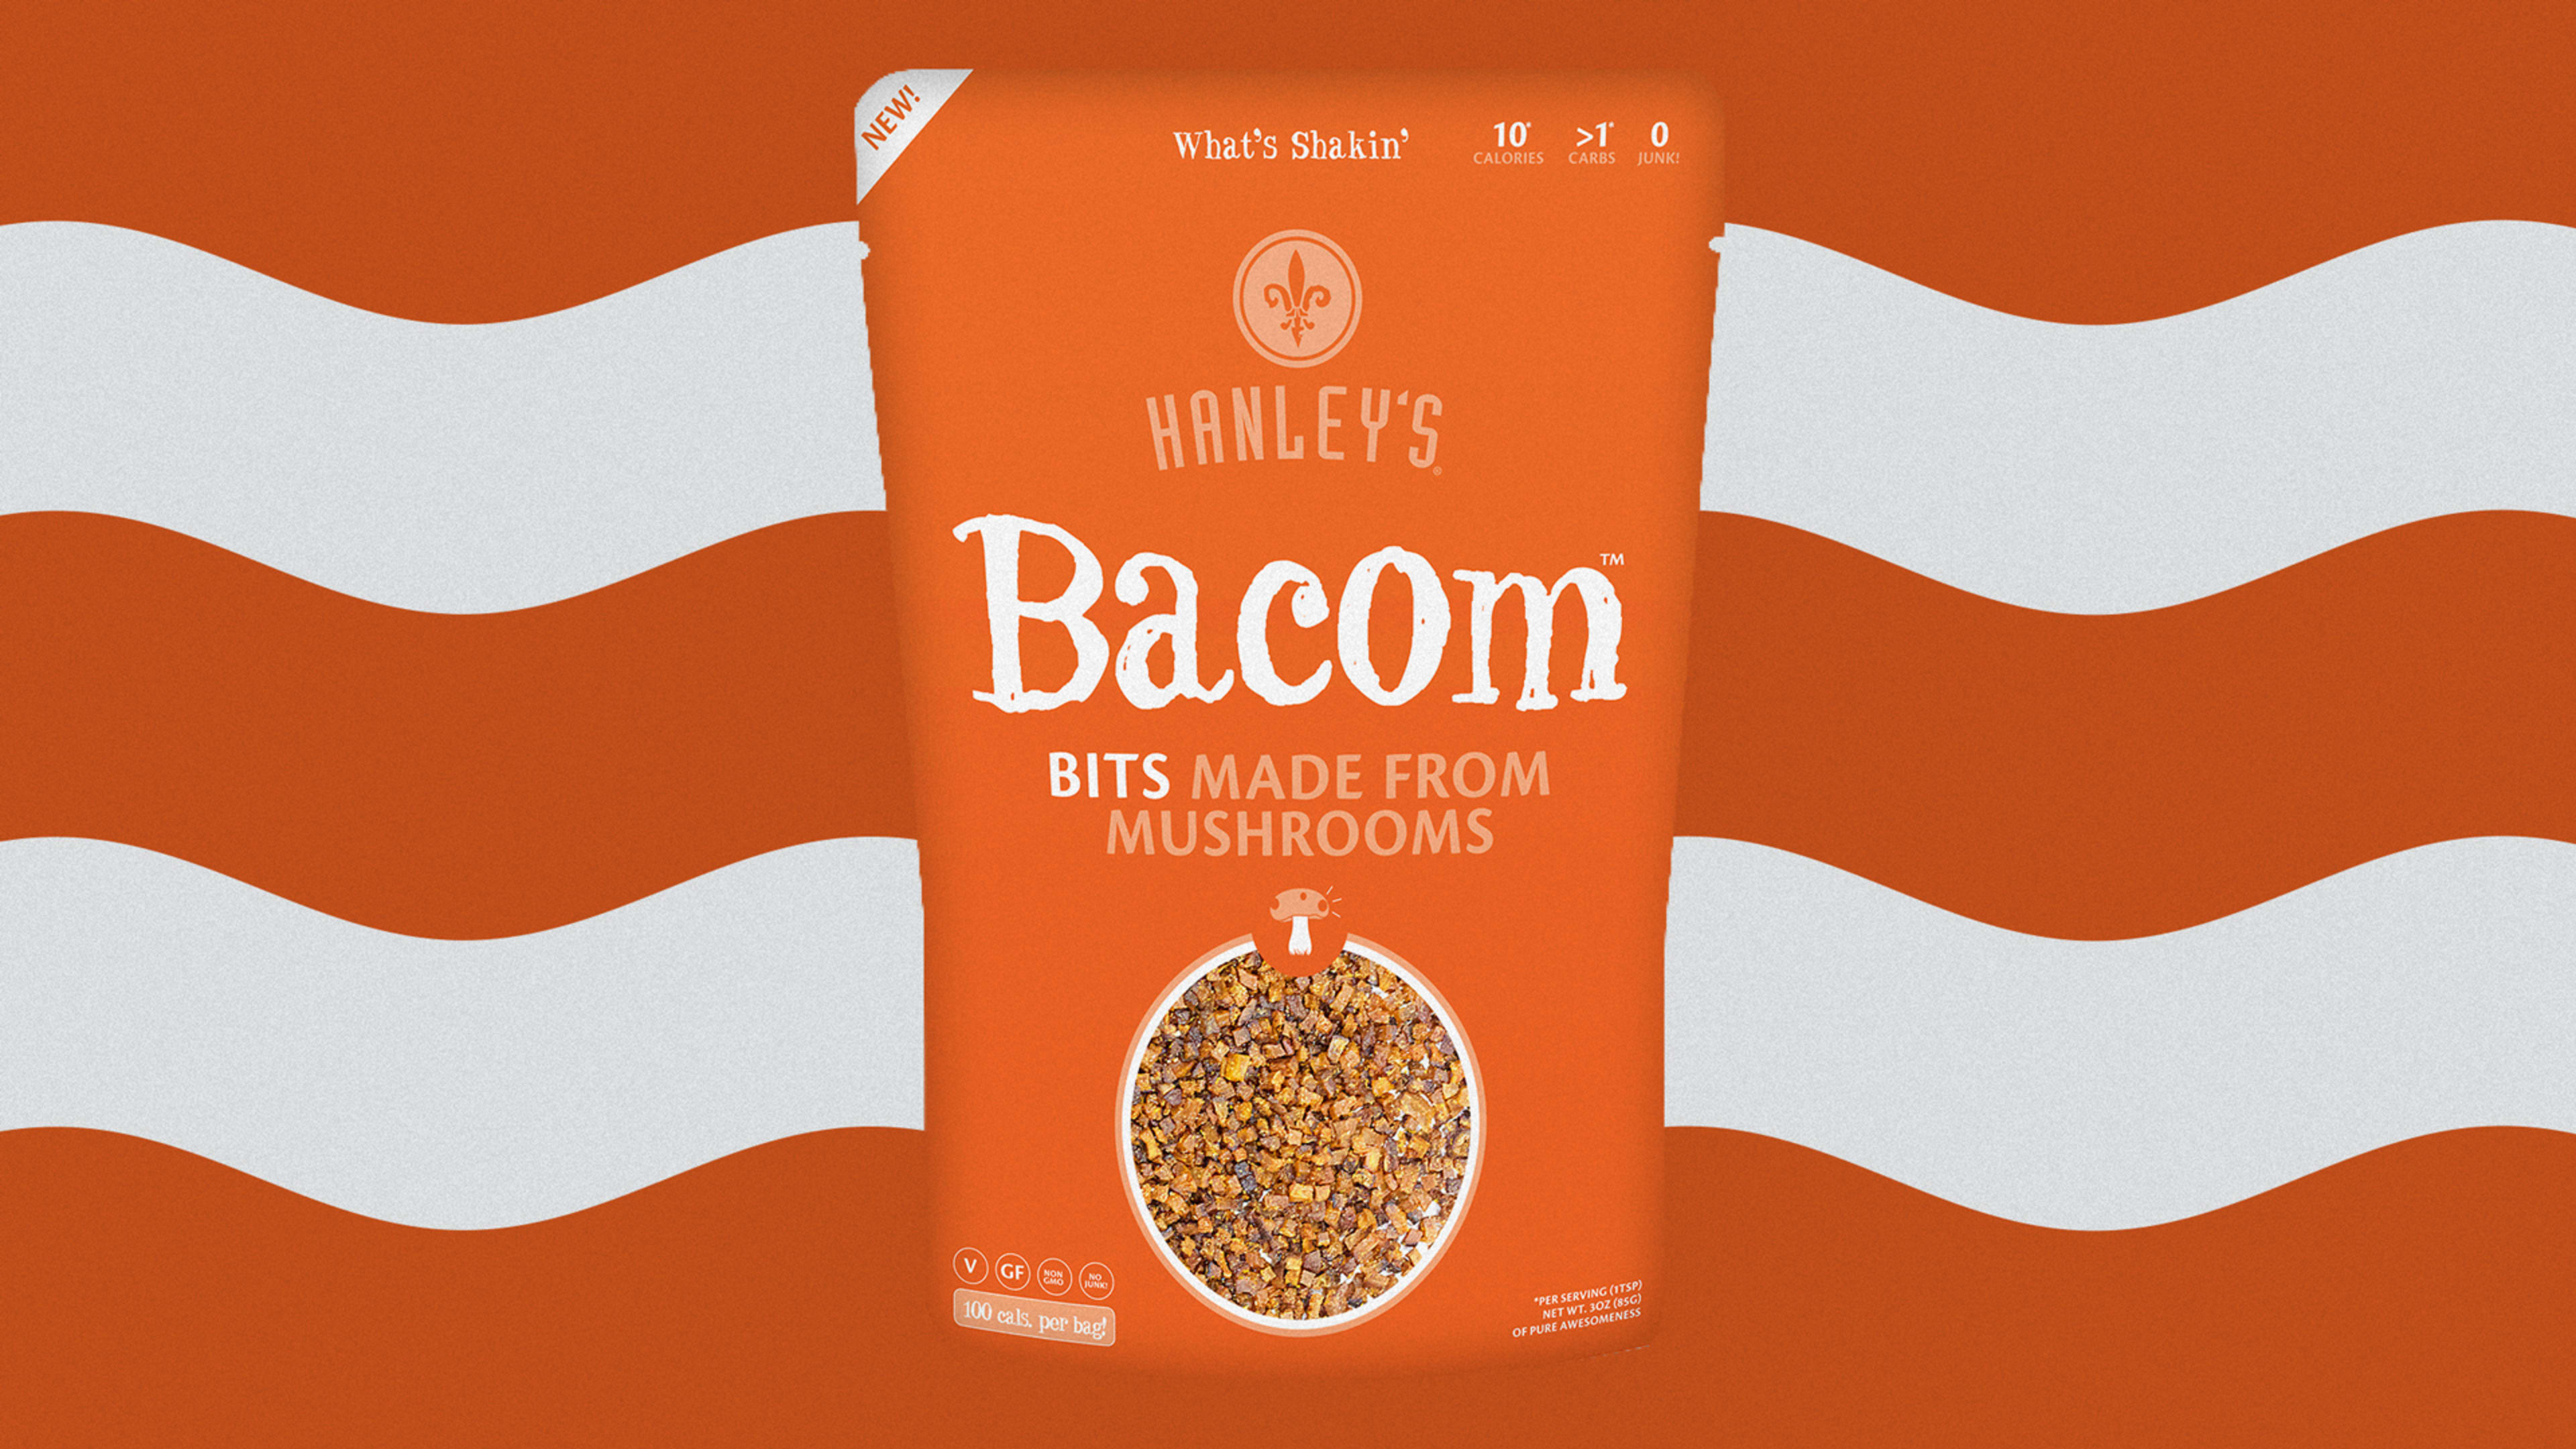 Another meat gets replaced: Now your bacon bits can be made from mushrooms